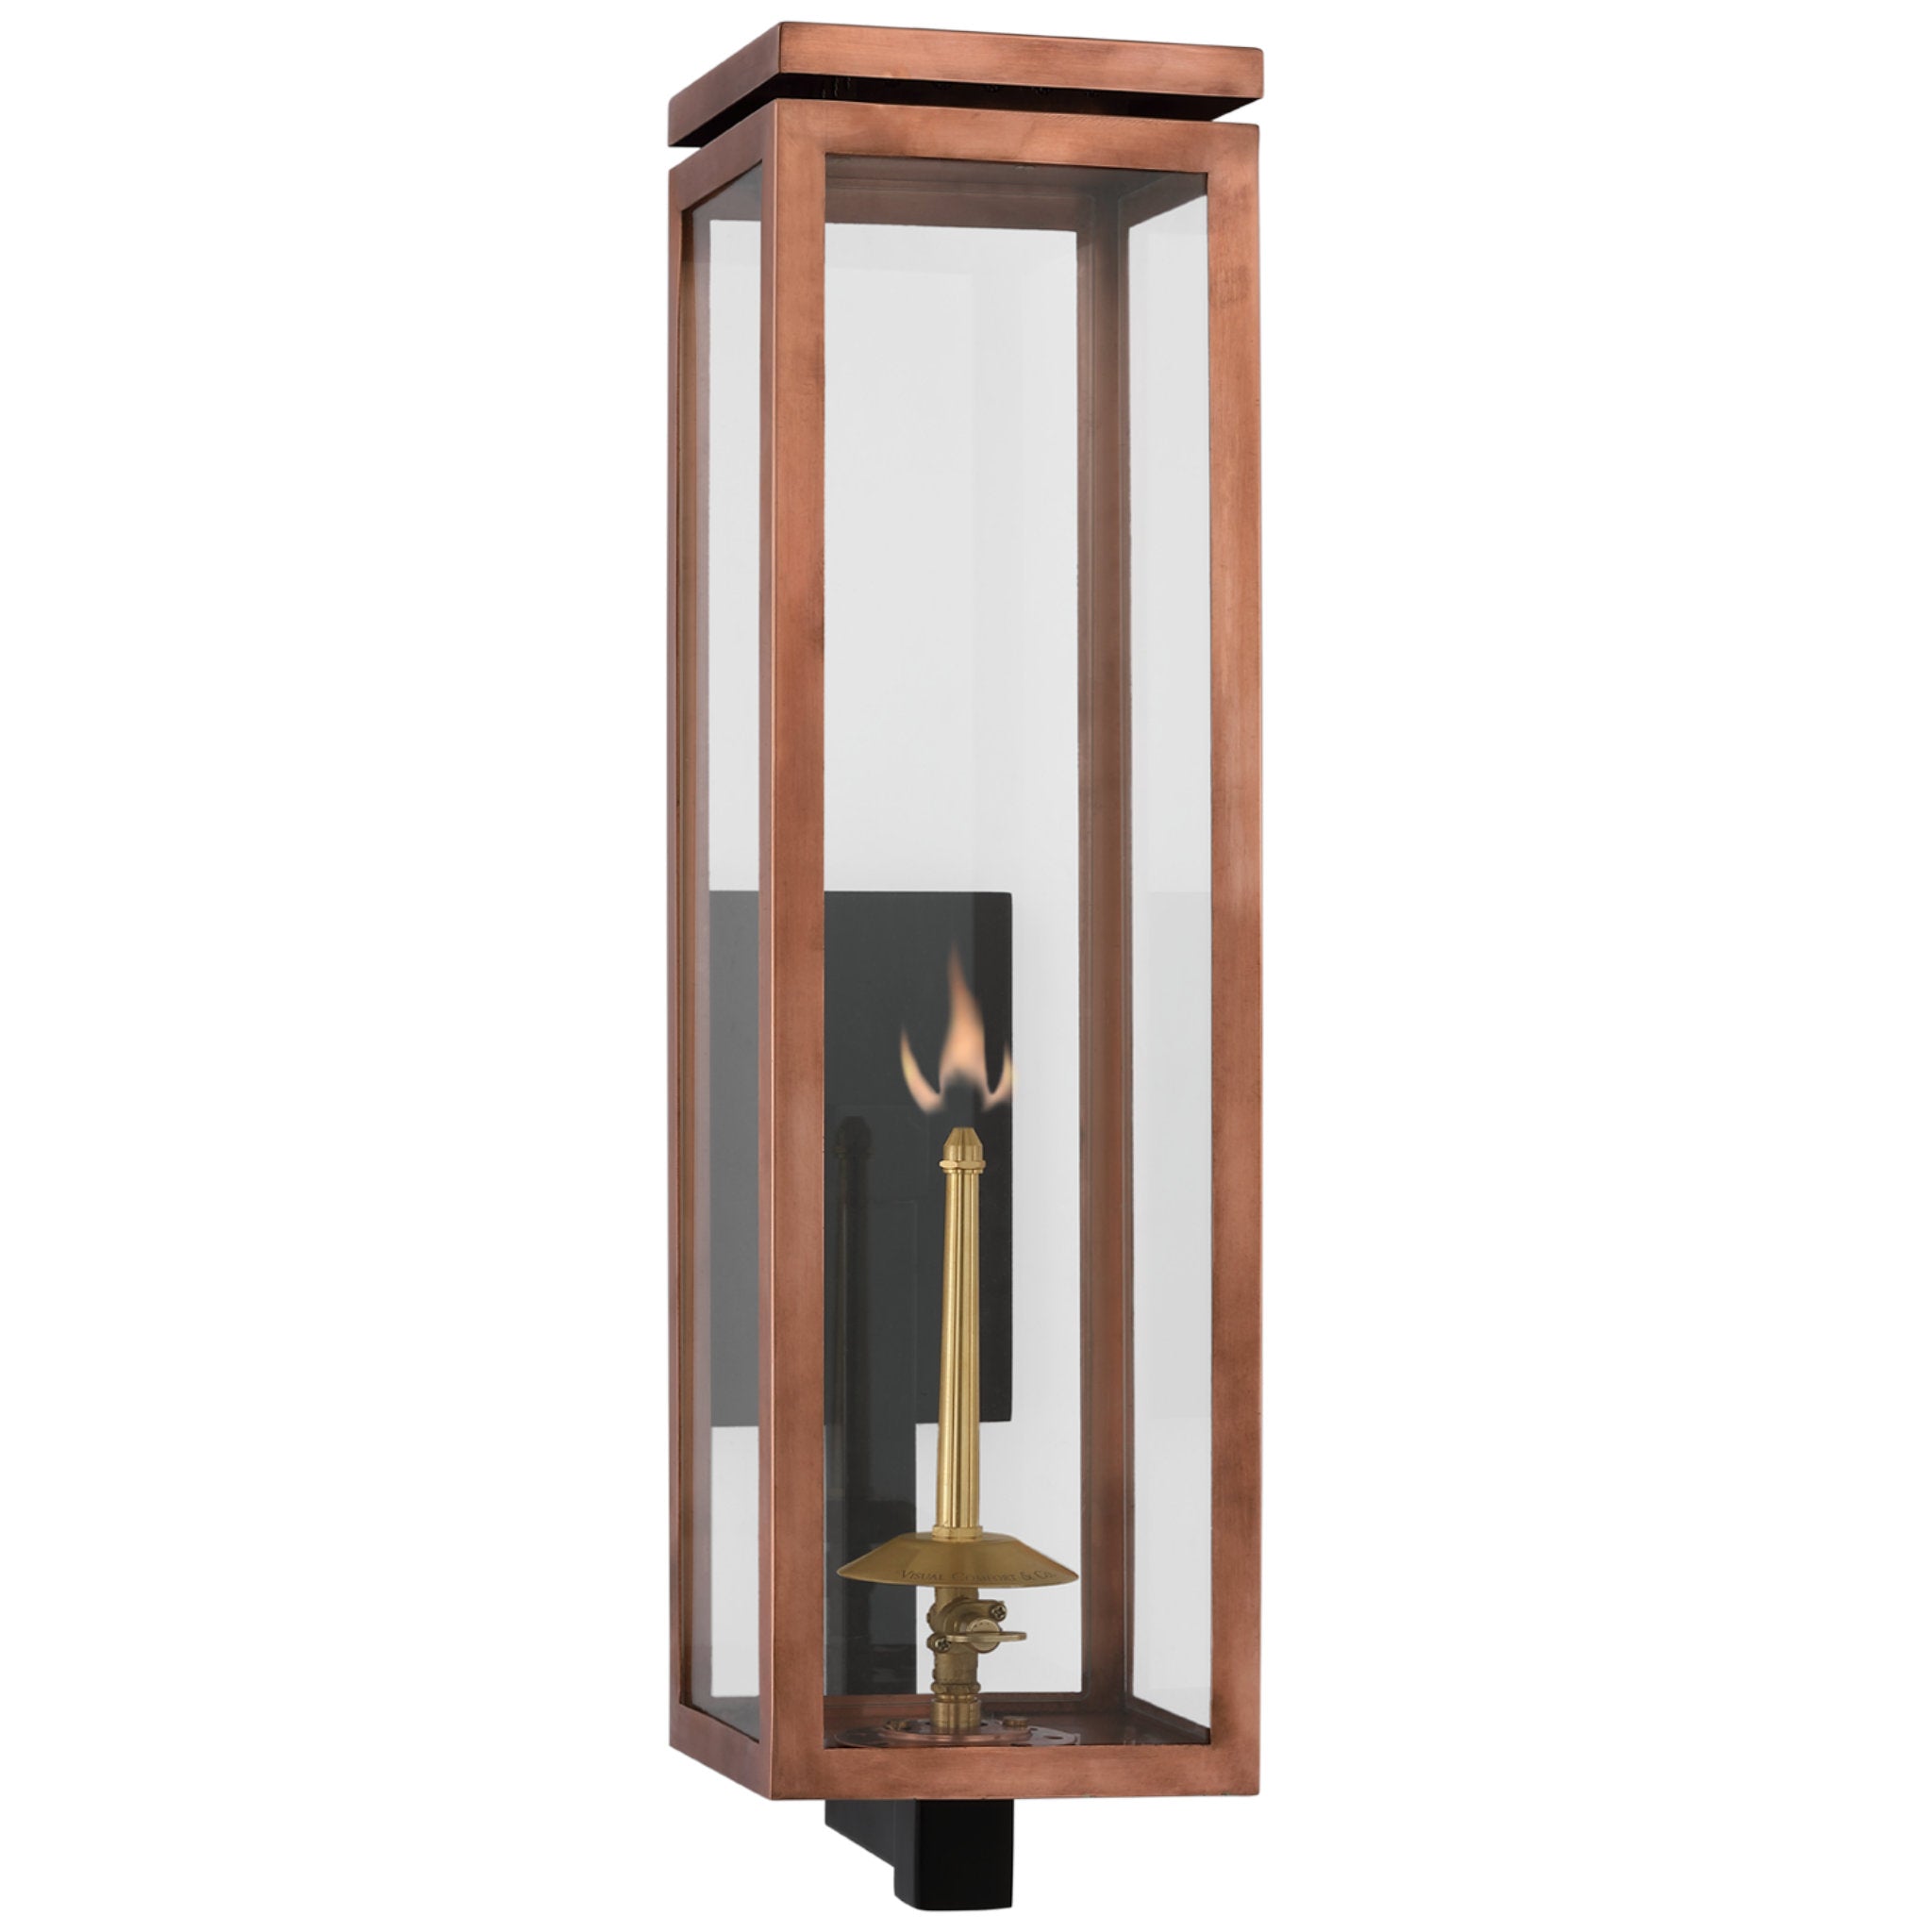 Chapman & Myers Fresno Large Bracketed Gas Wall Lantern in Soft Copper with Clear Glass